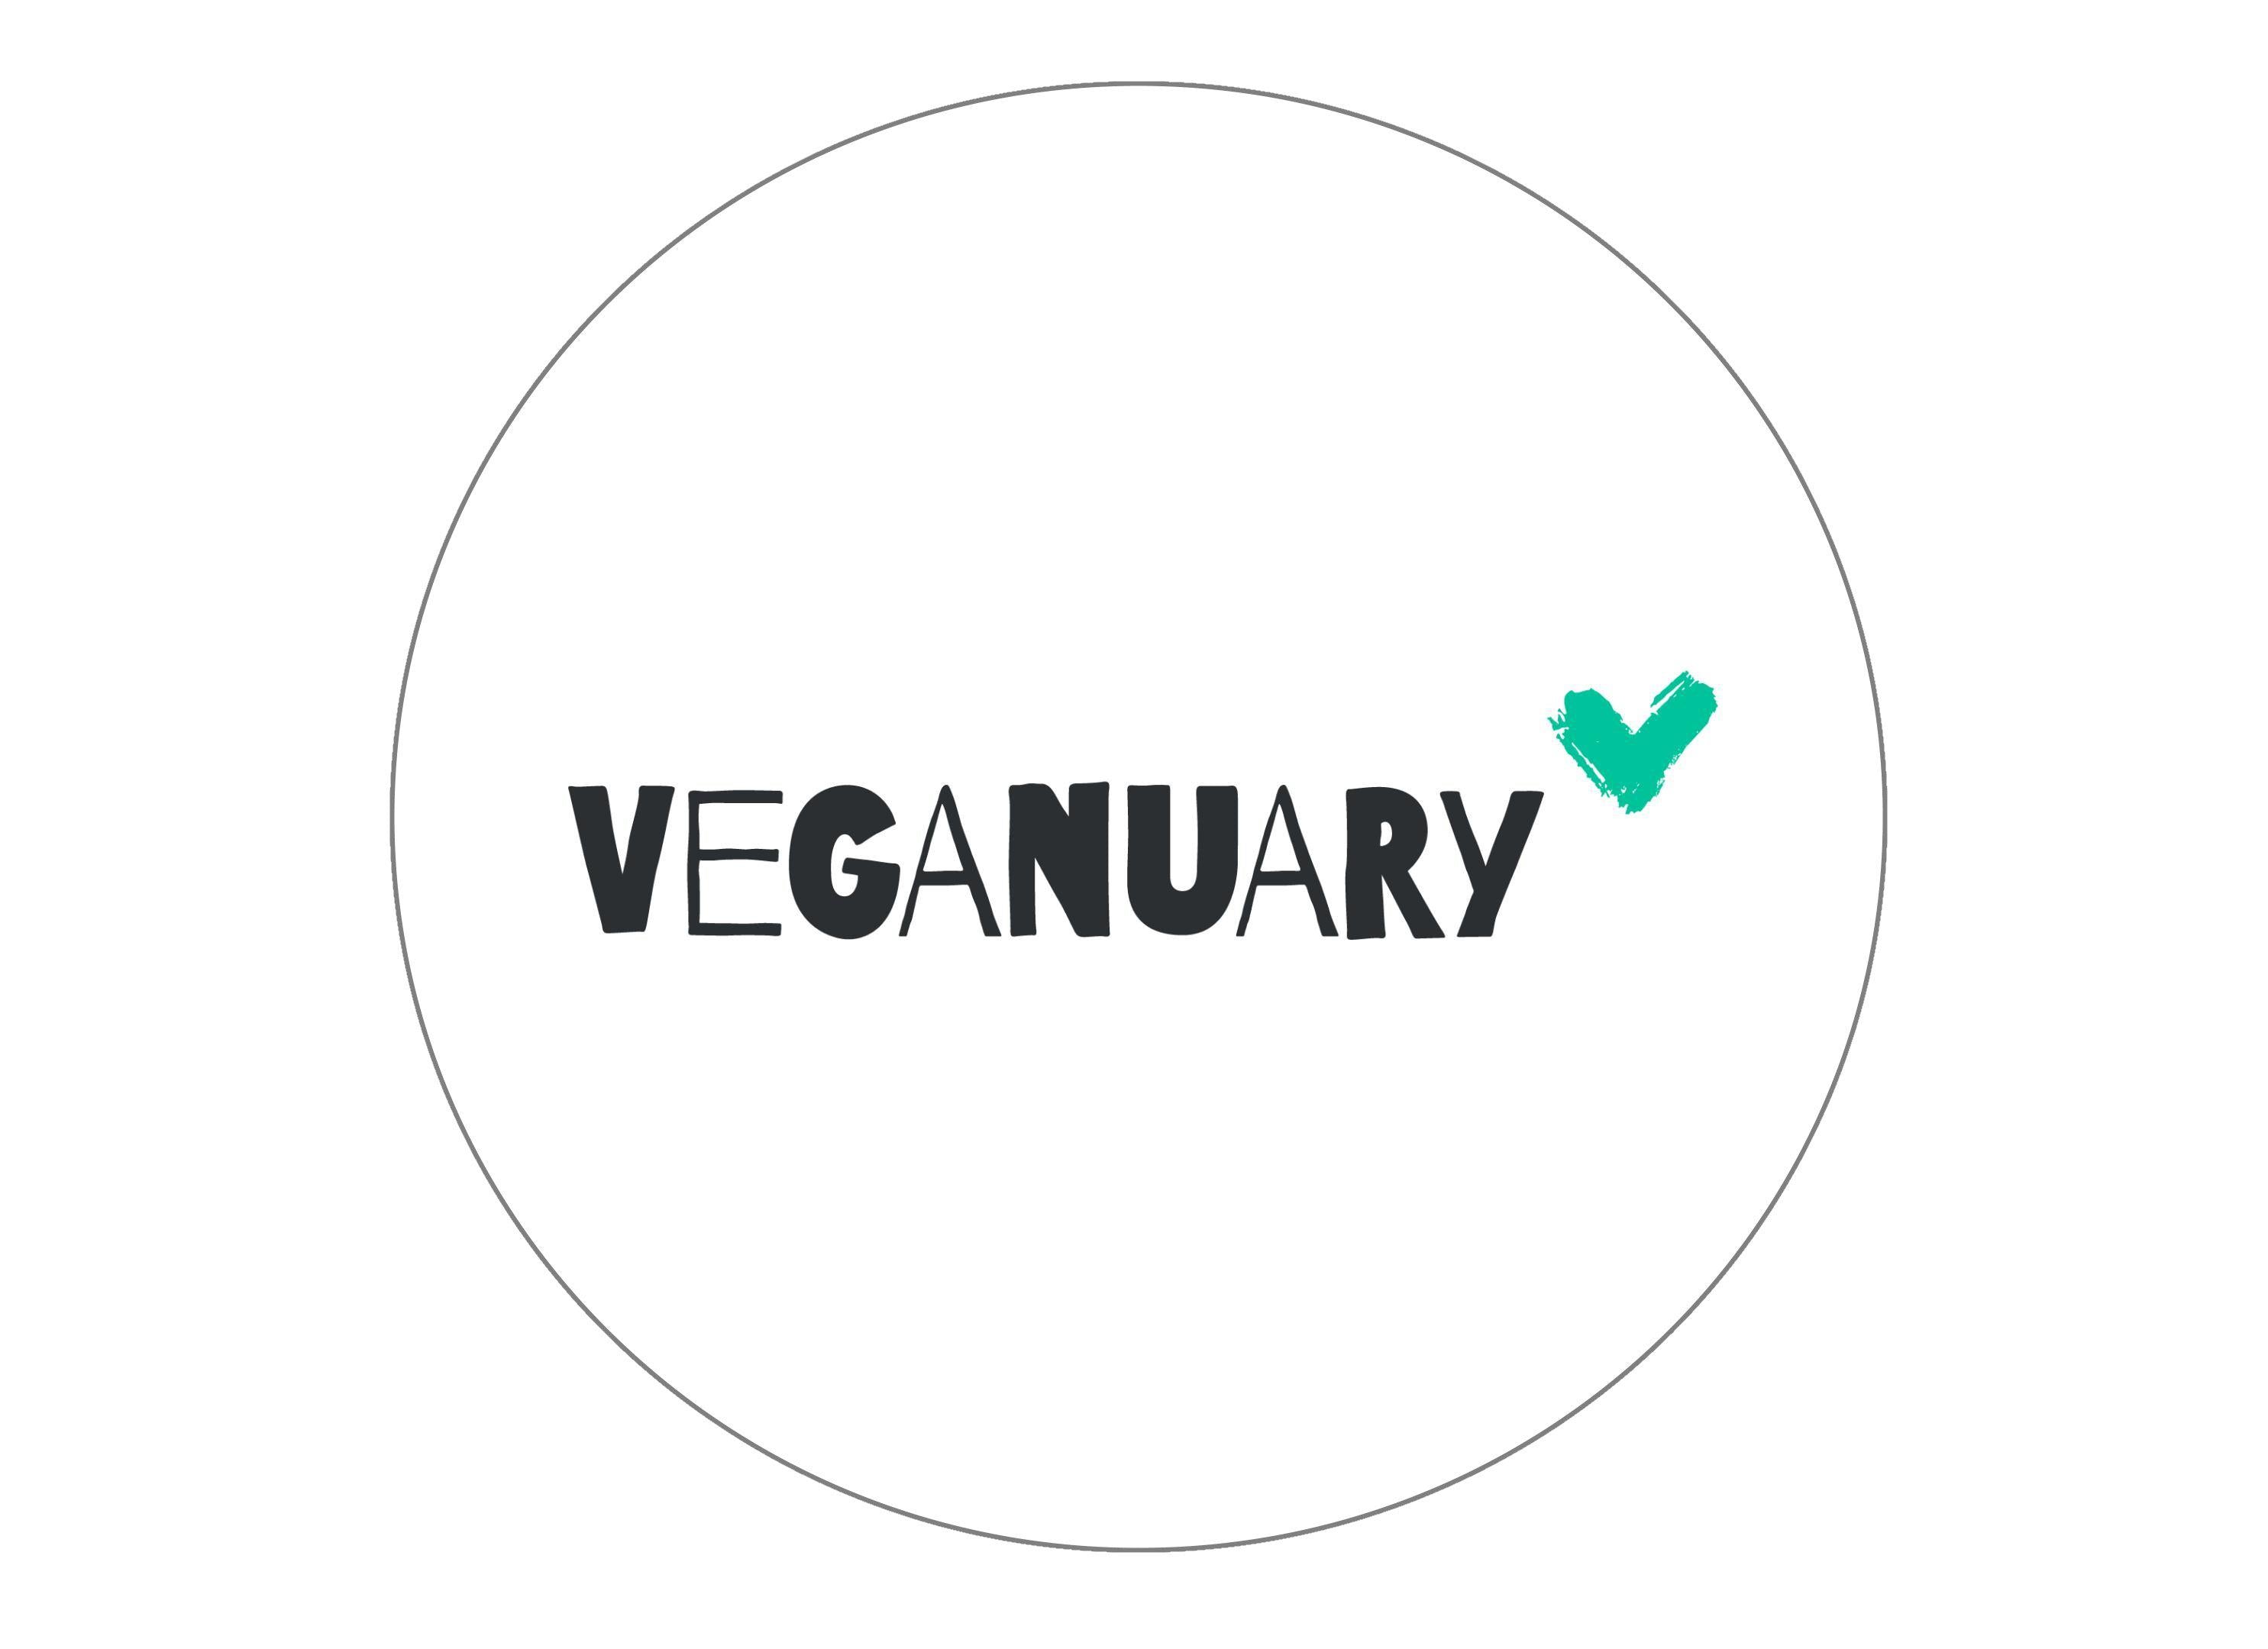 Large printed topper with the Veganuary Green logo